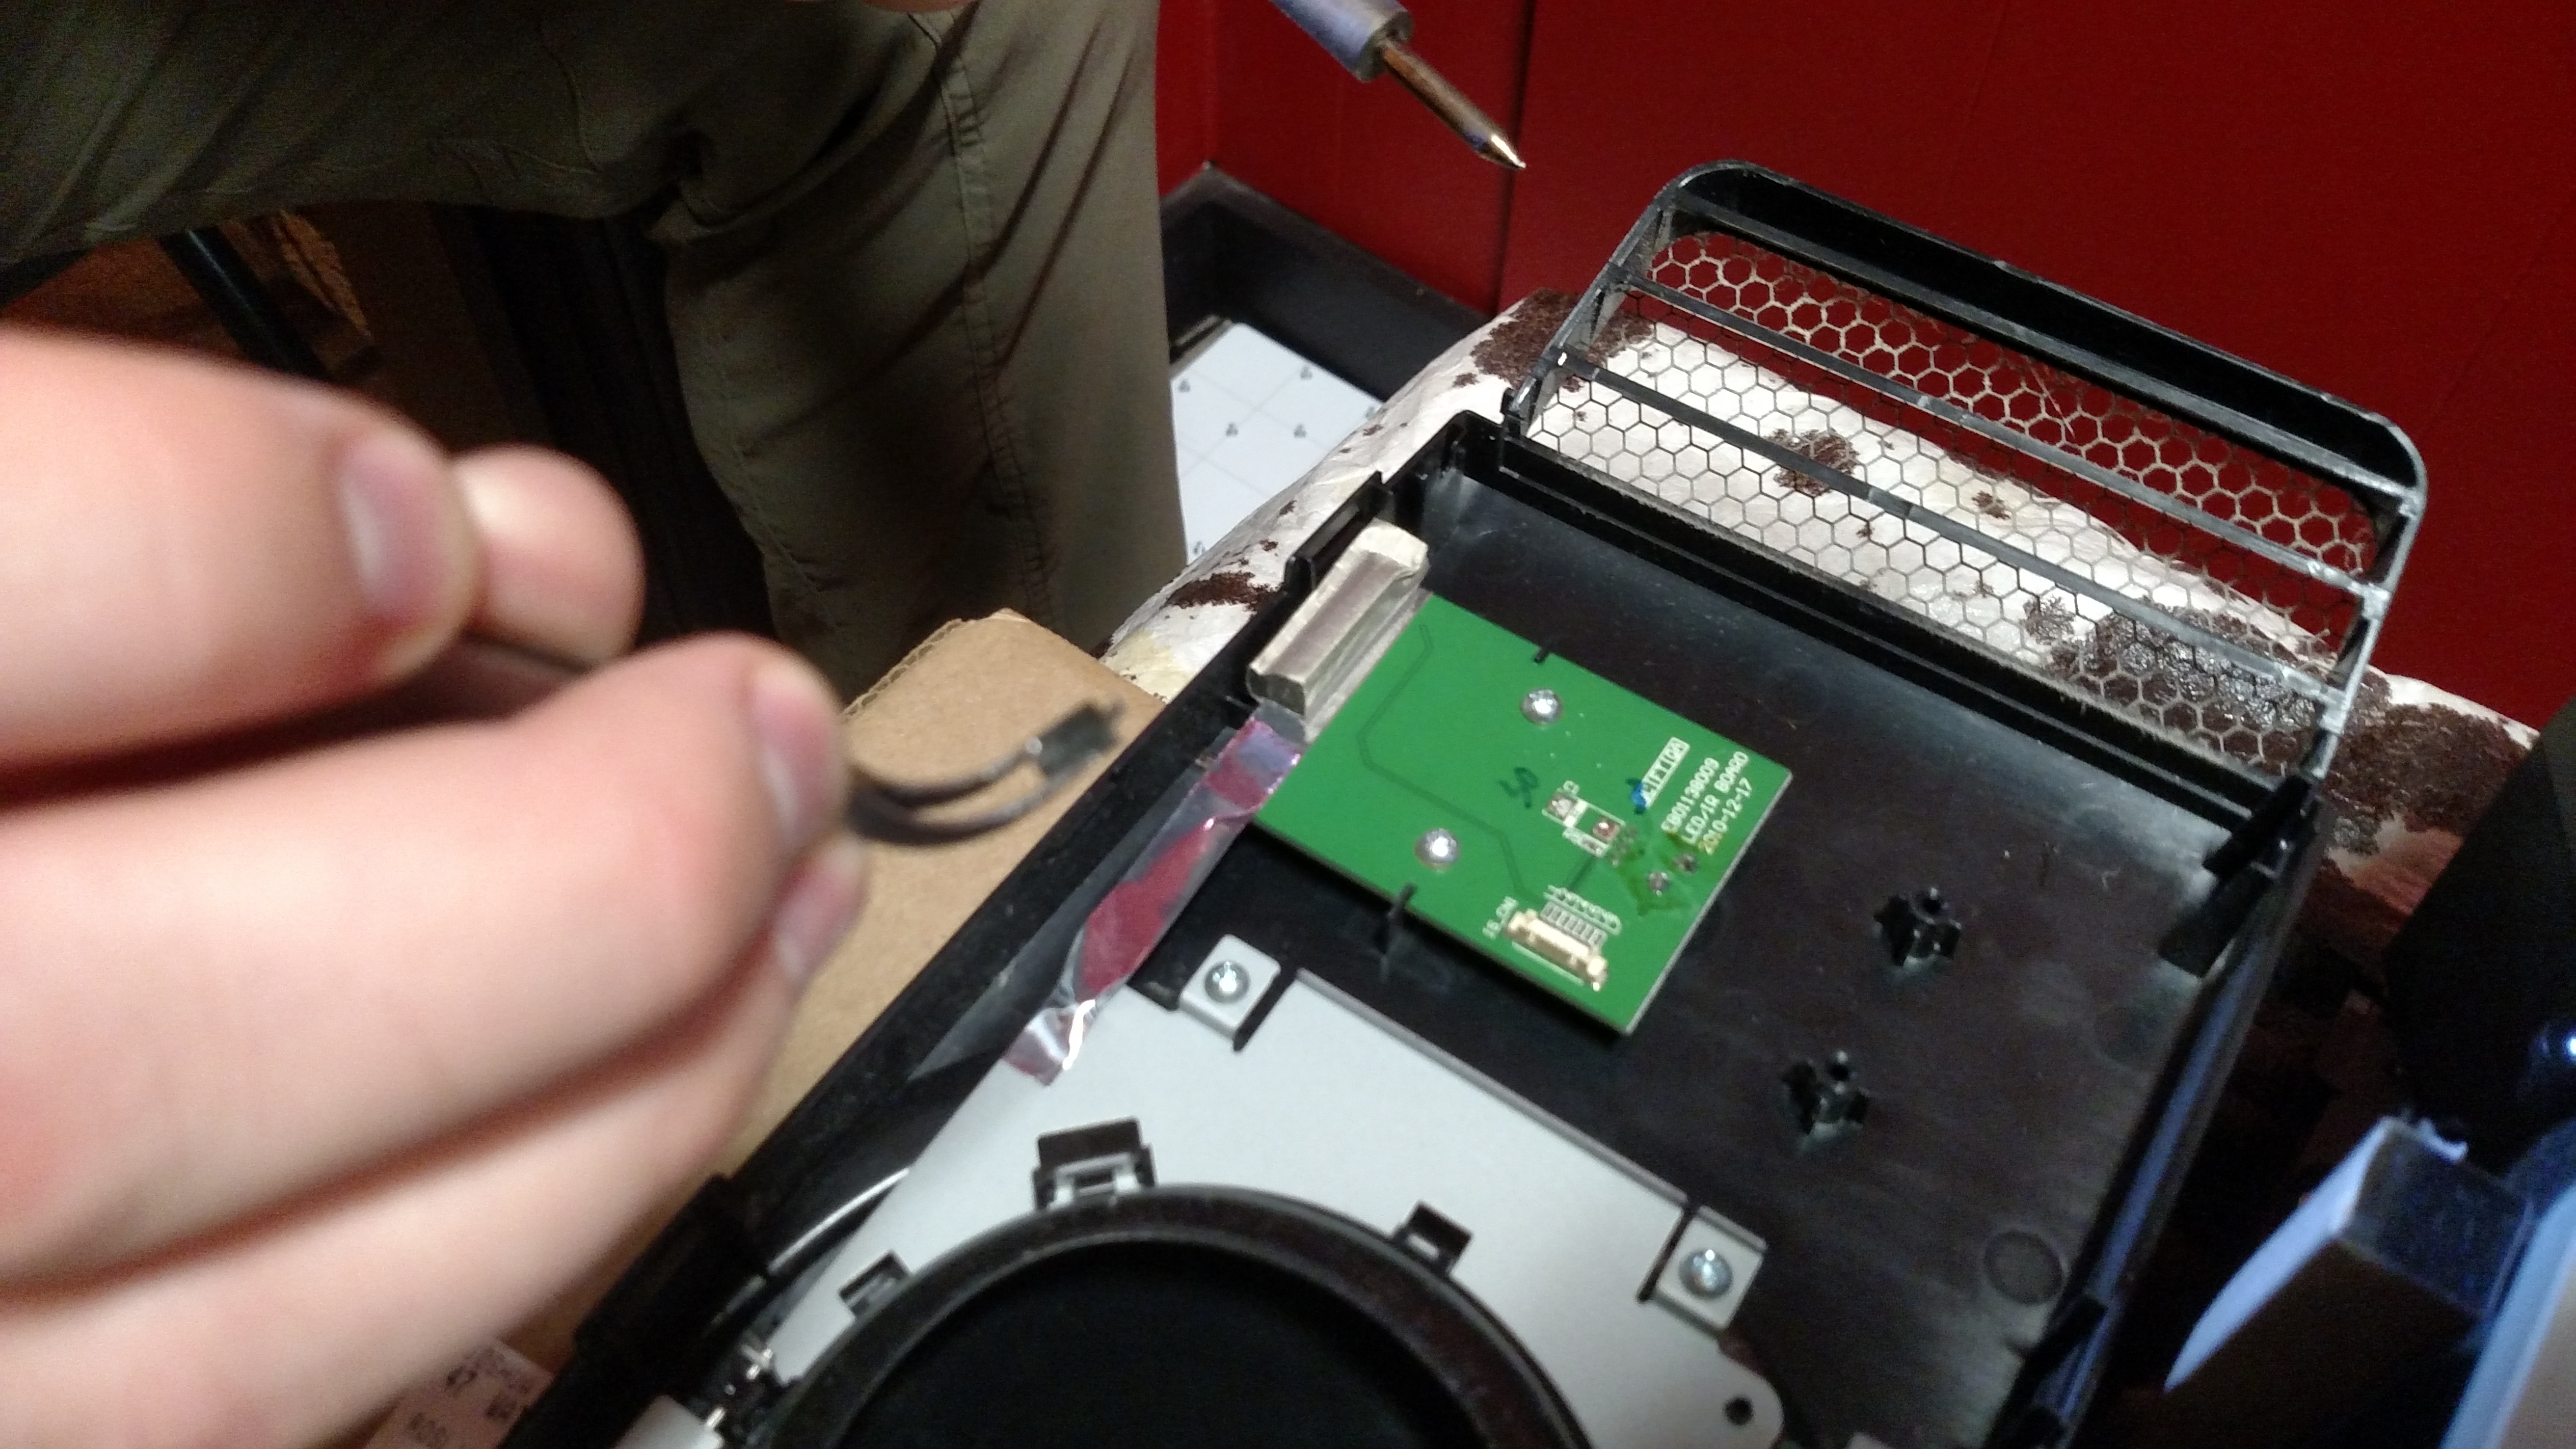 Removing the Capacitor